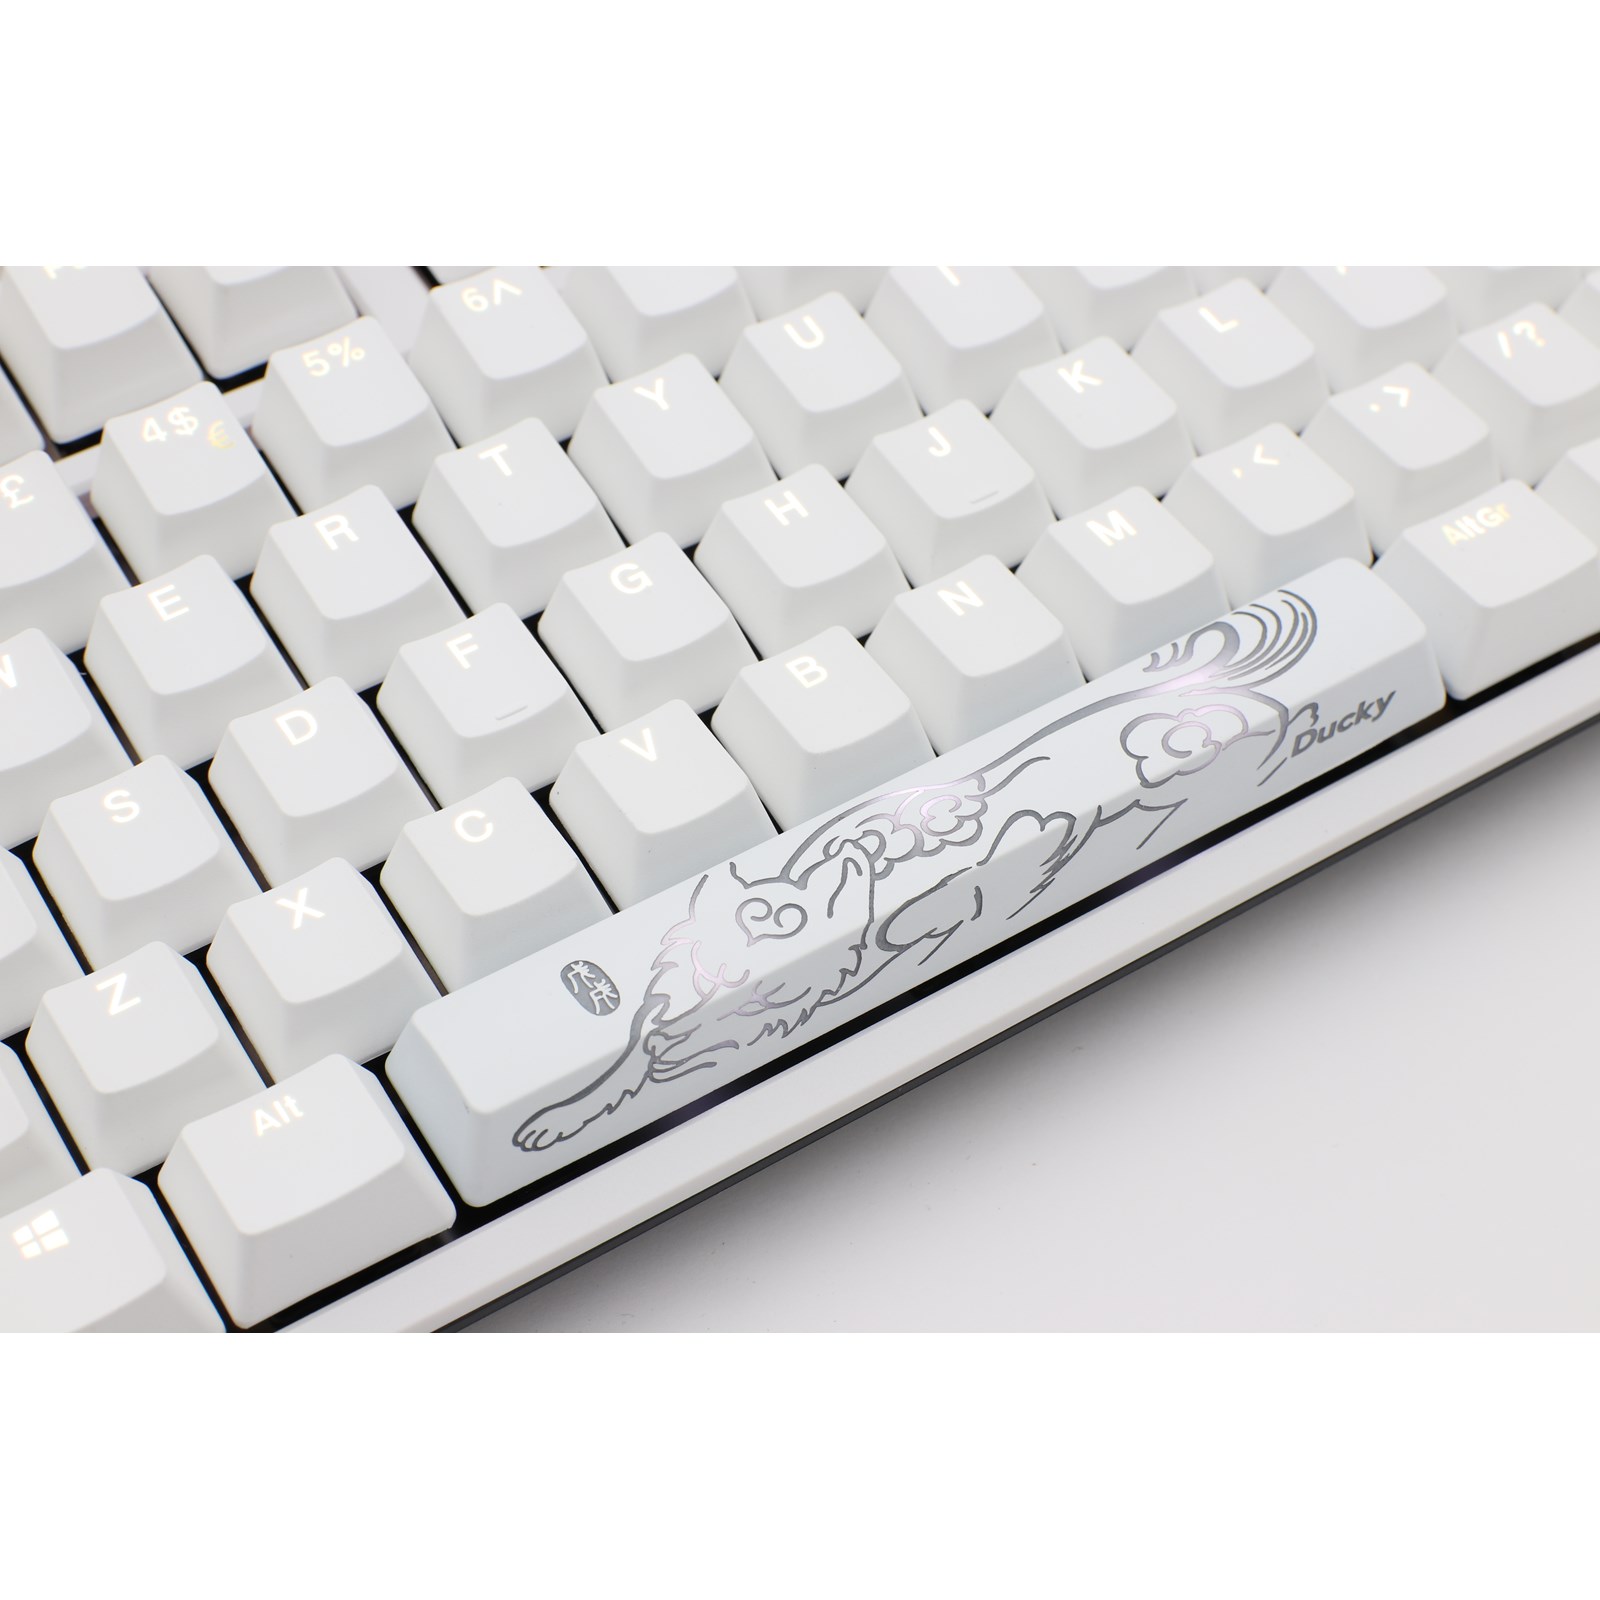 Ducky One2 White Edition Usb Mechanical Keyboard White With